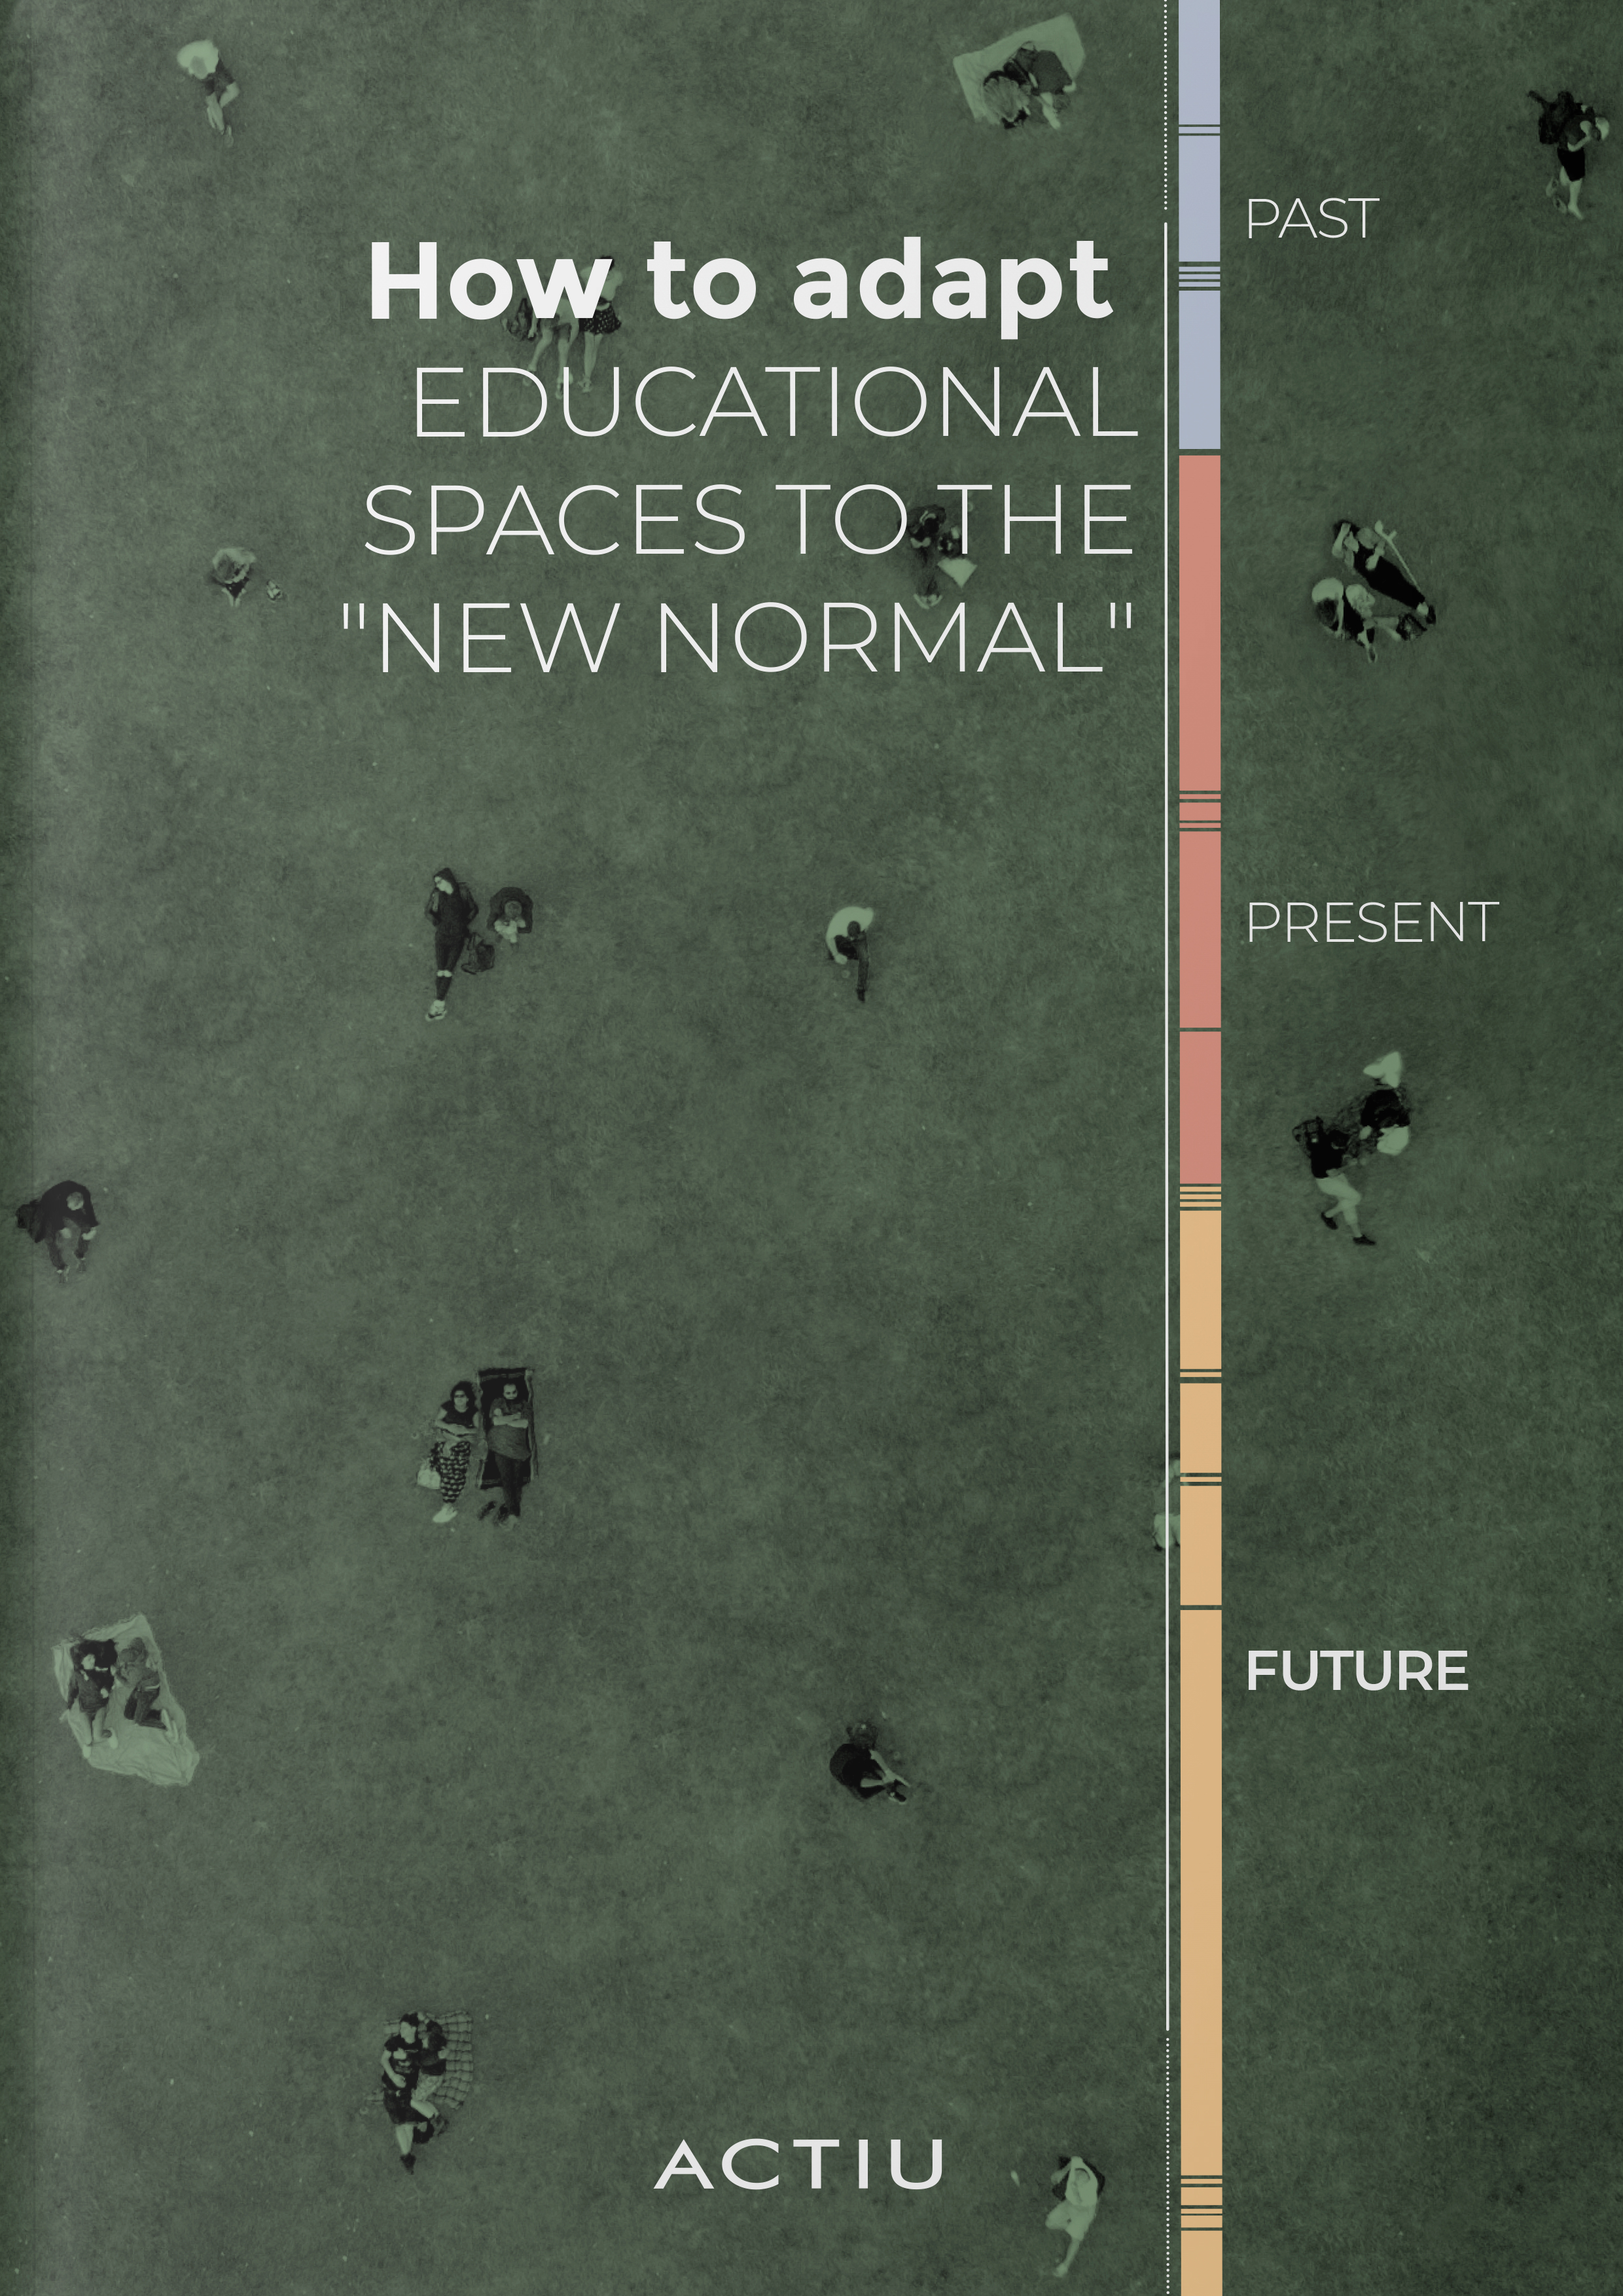 DOWNLOAD GUIDE: HOW TO ADAPT EDUCATIONAL SPACES TO THE NEW NORMAL